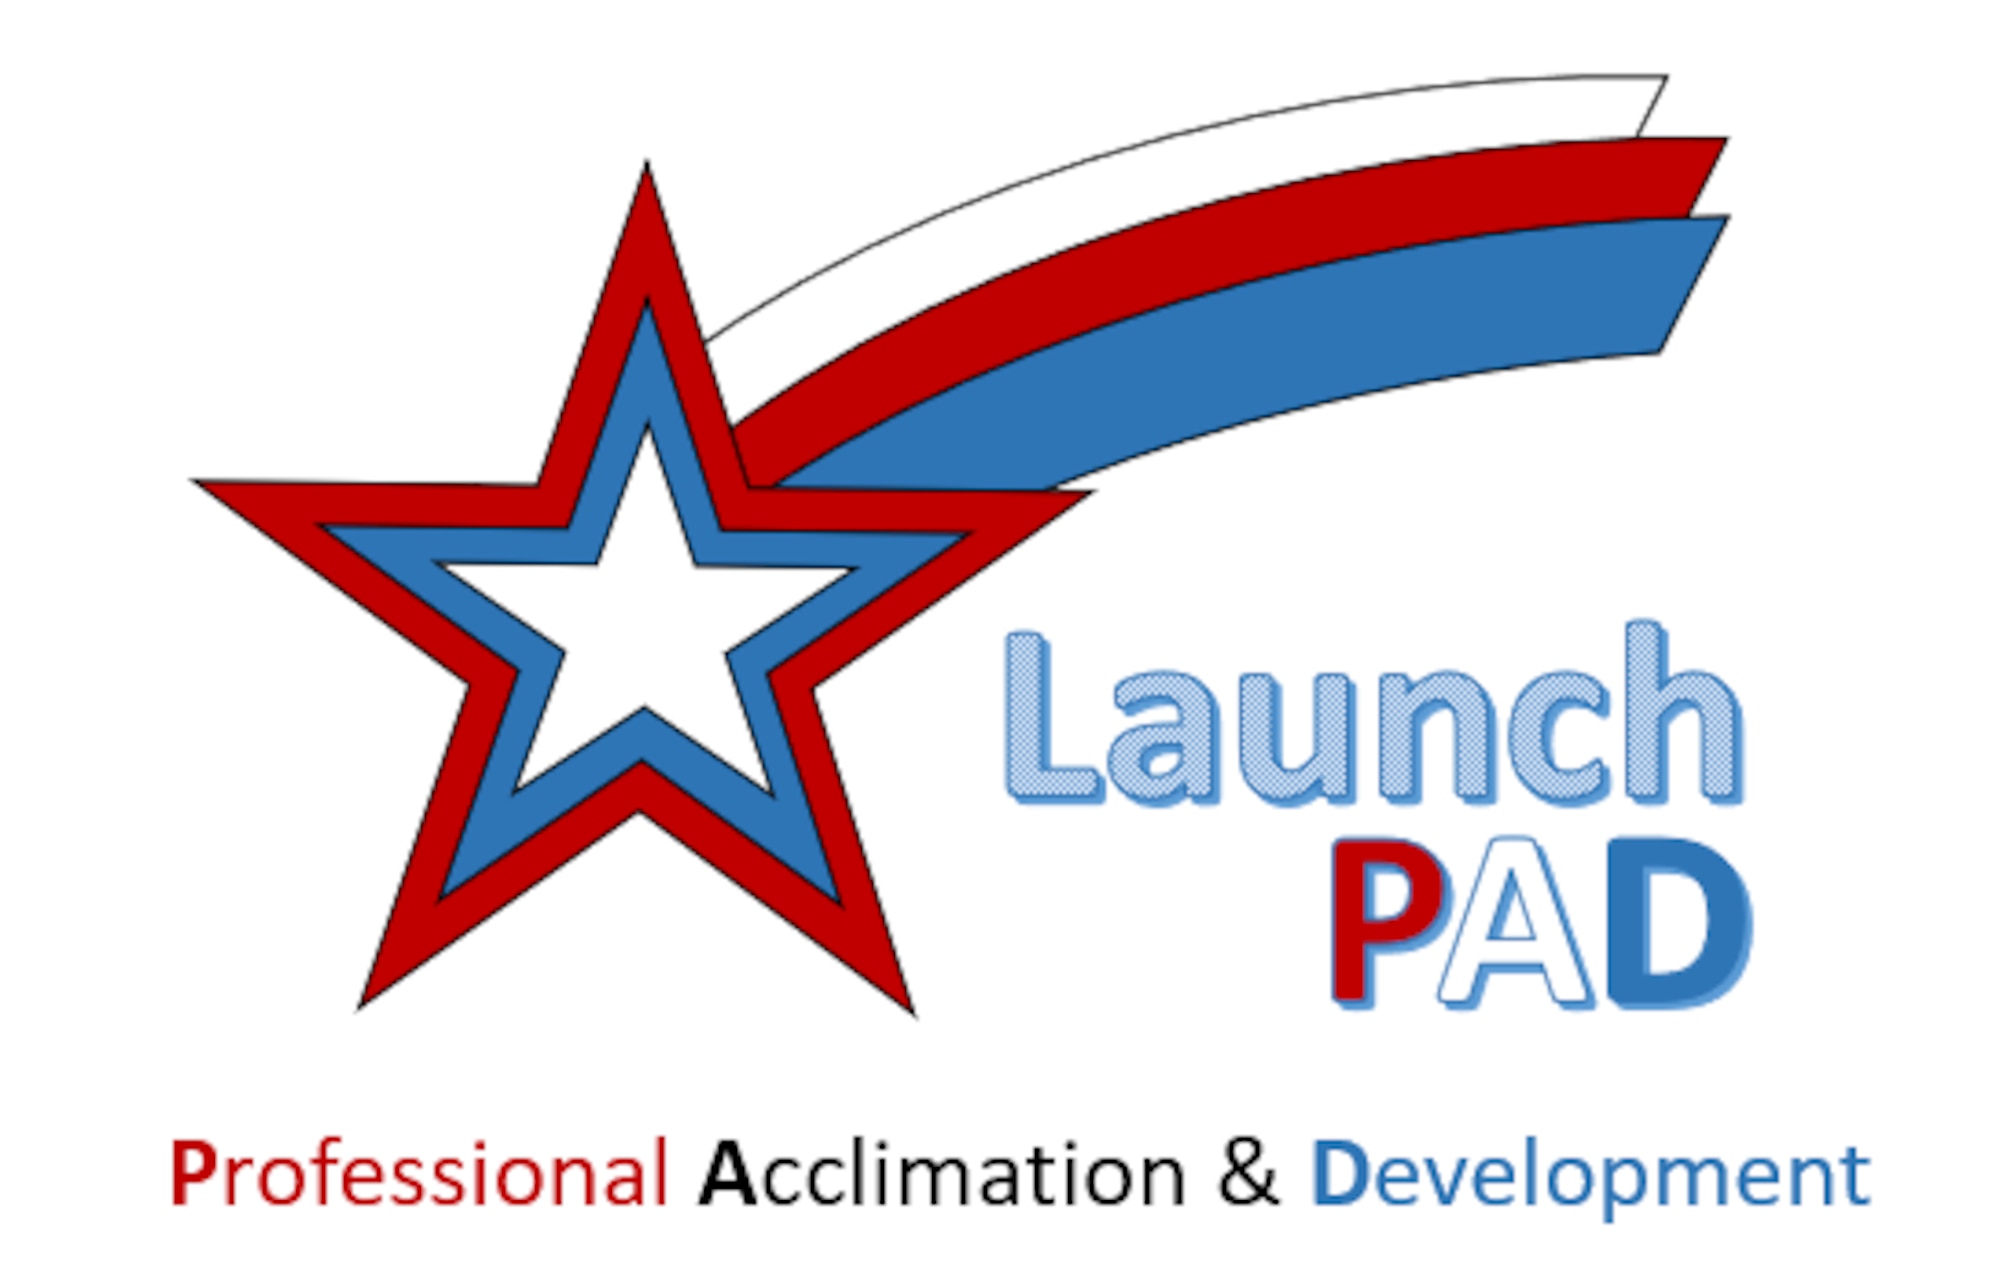 The Launch PAD employee resource group began meeting at Arnold Air Force Base, Tenn., in February 2023 after officially forming the previous month. The program was established to provide professional development resources to Arnold Engineering Development Complex employees, particularly those early in their careers. (Courtesy graphic)